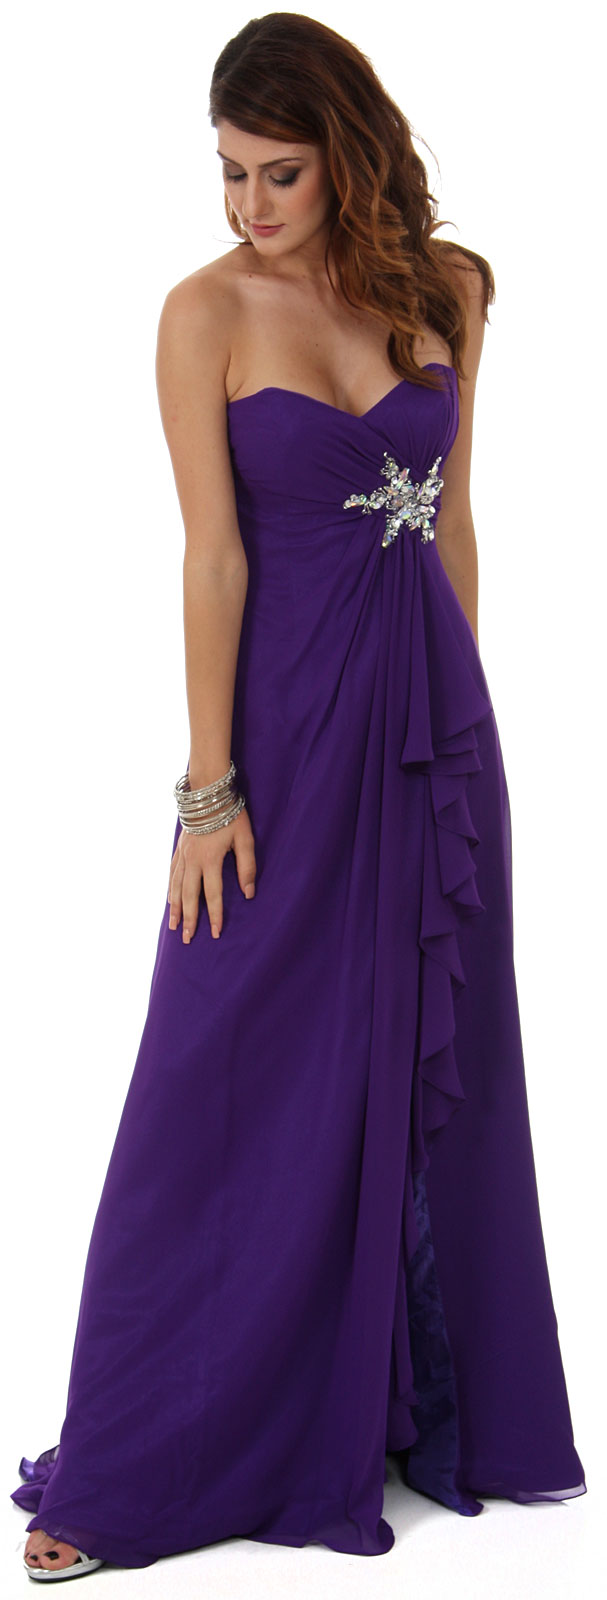 Image of Strapless Long Bridesmaid Dress With Ruffled Side Slit  in an alternative picture